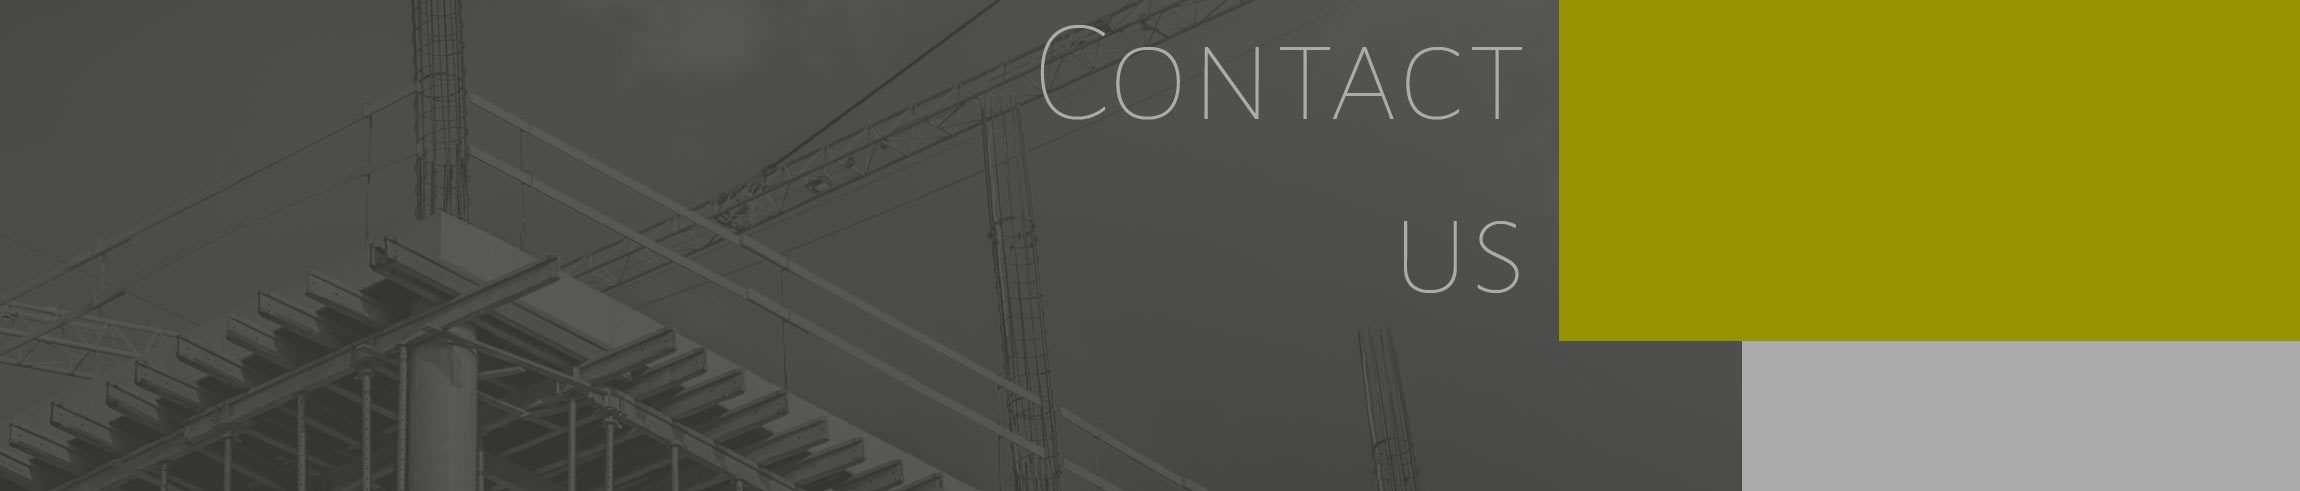 Contact us Header graphic